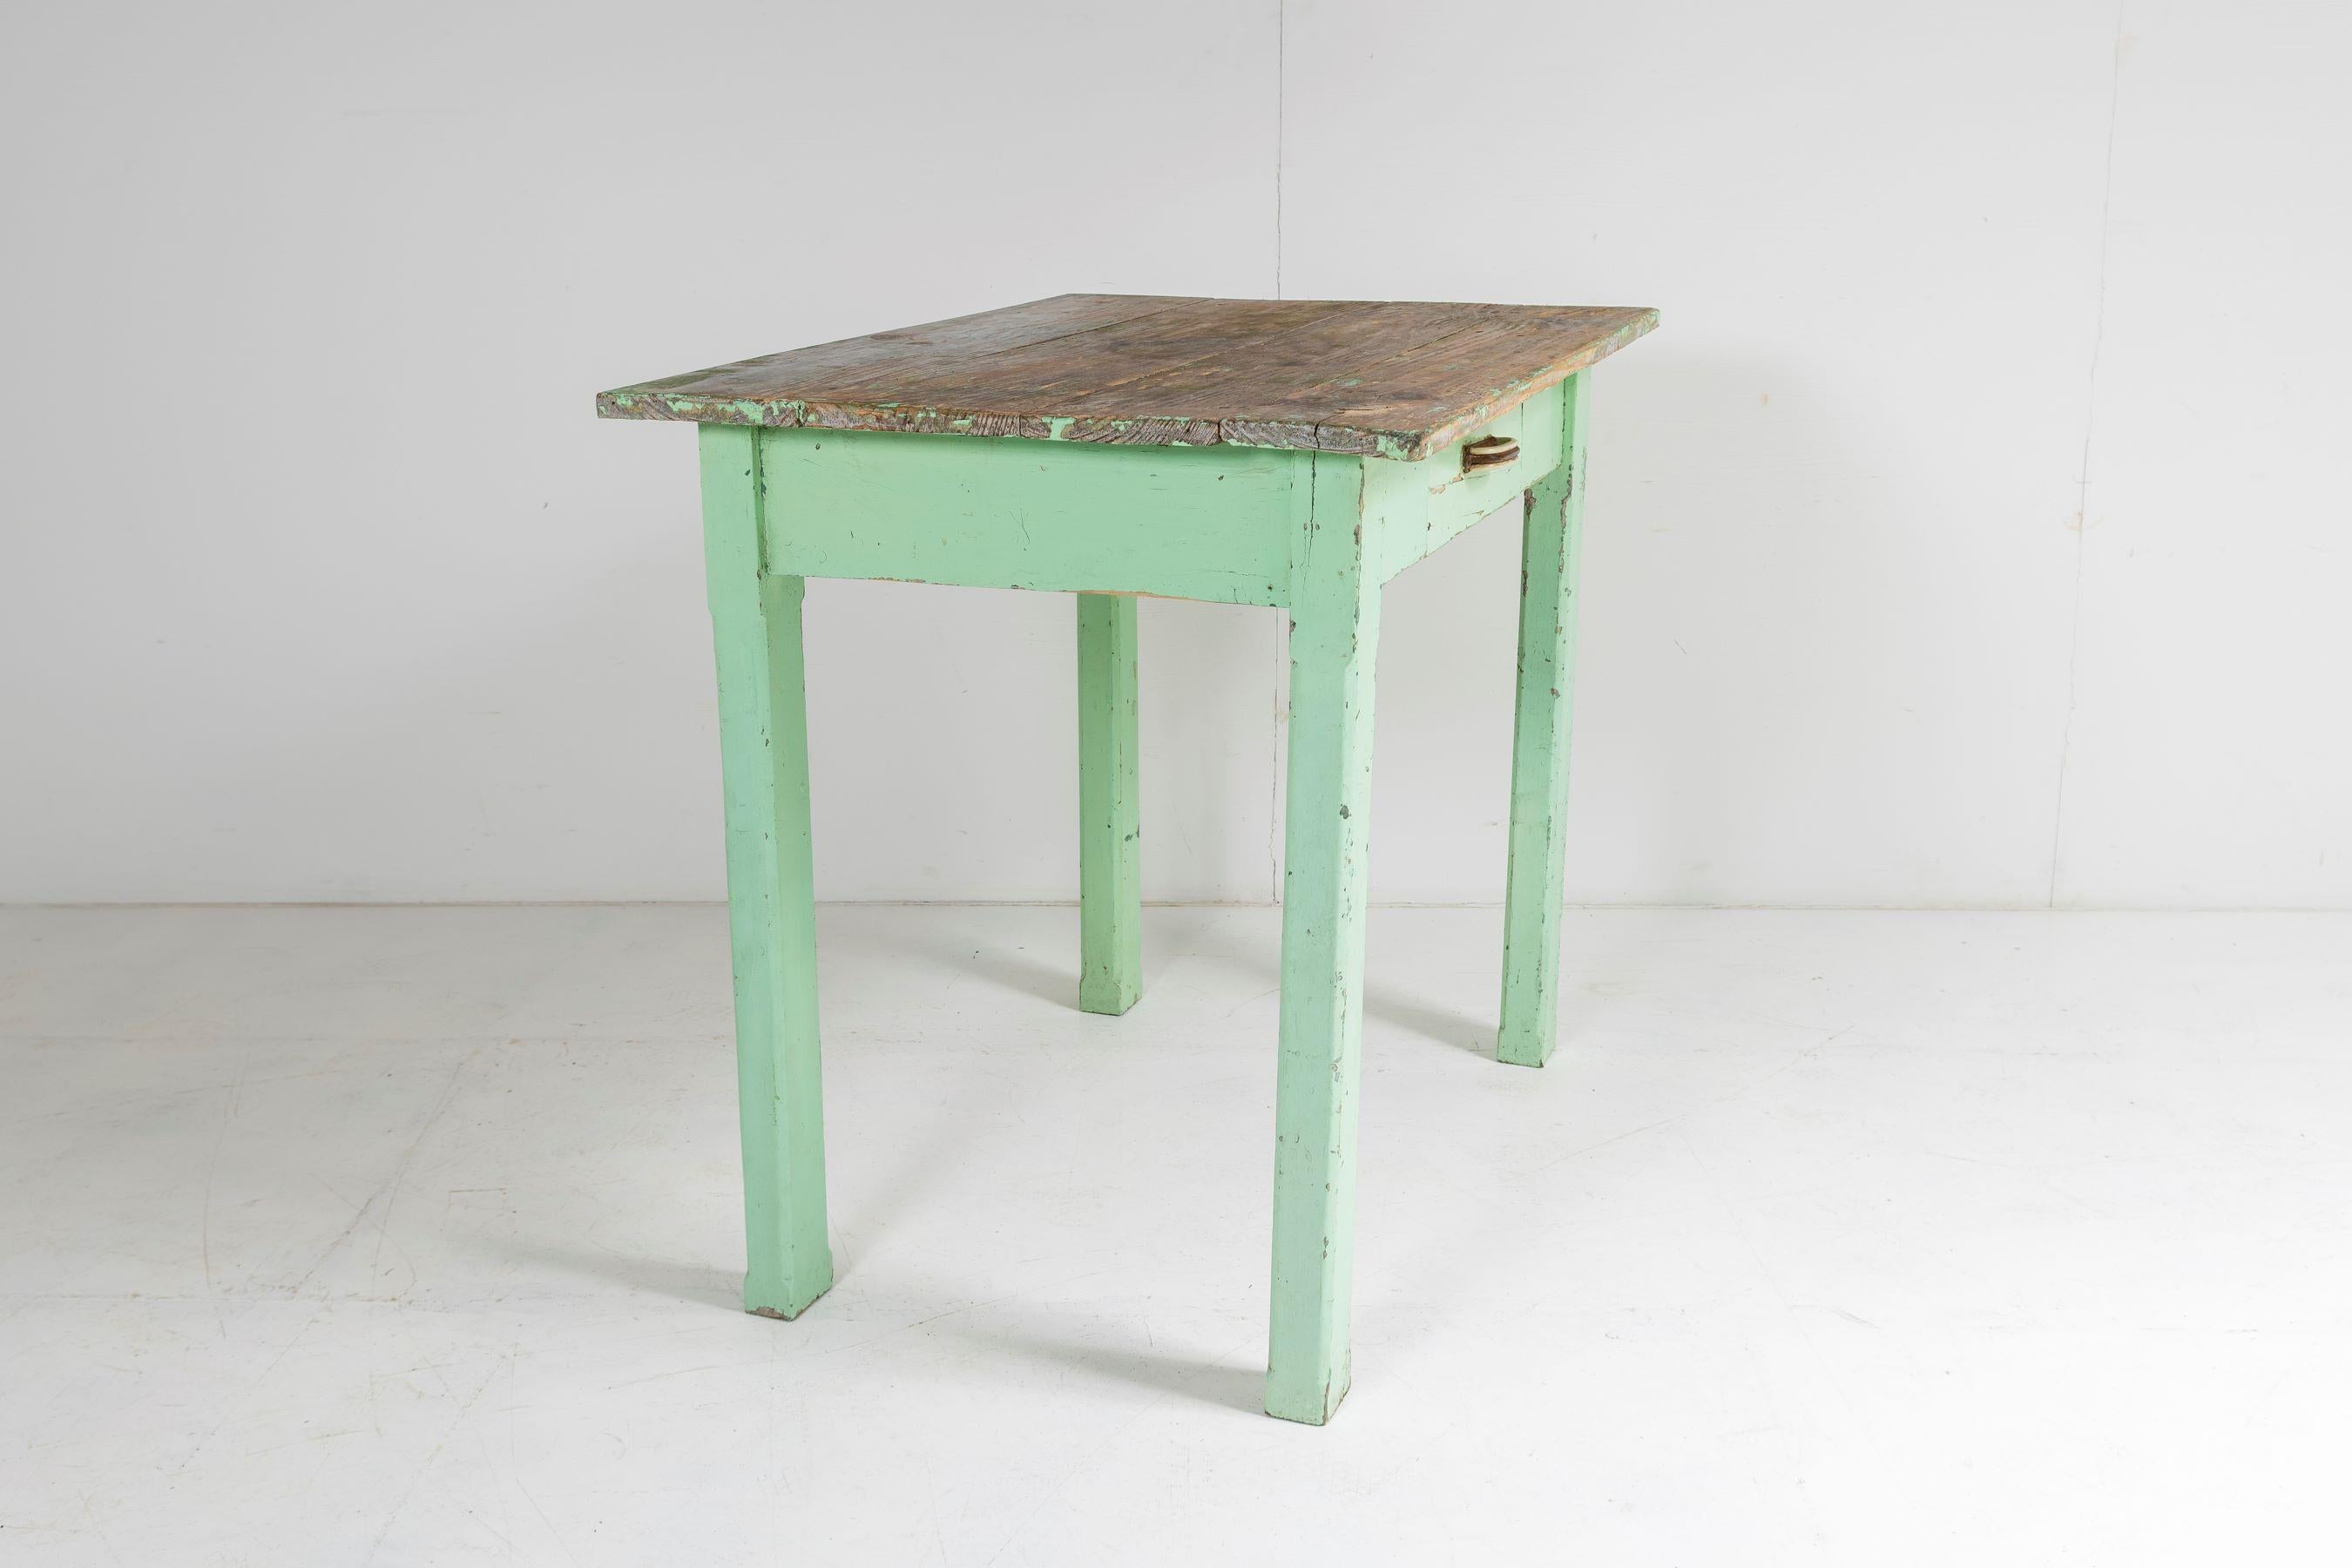 Small Original Rustic Green Painted Pine Farmhouse Table or Writing Table Desk 1